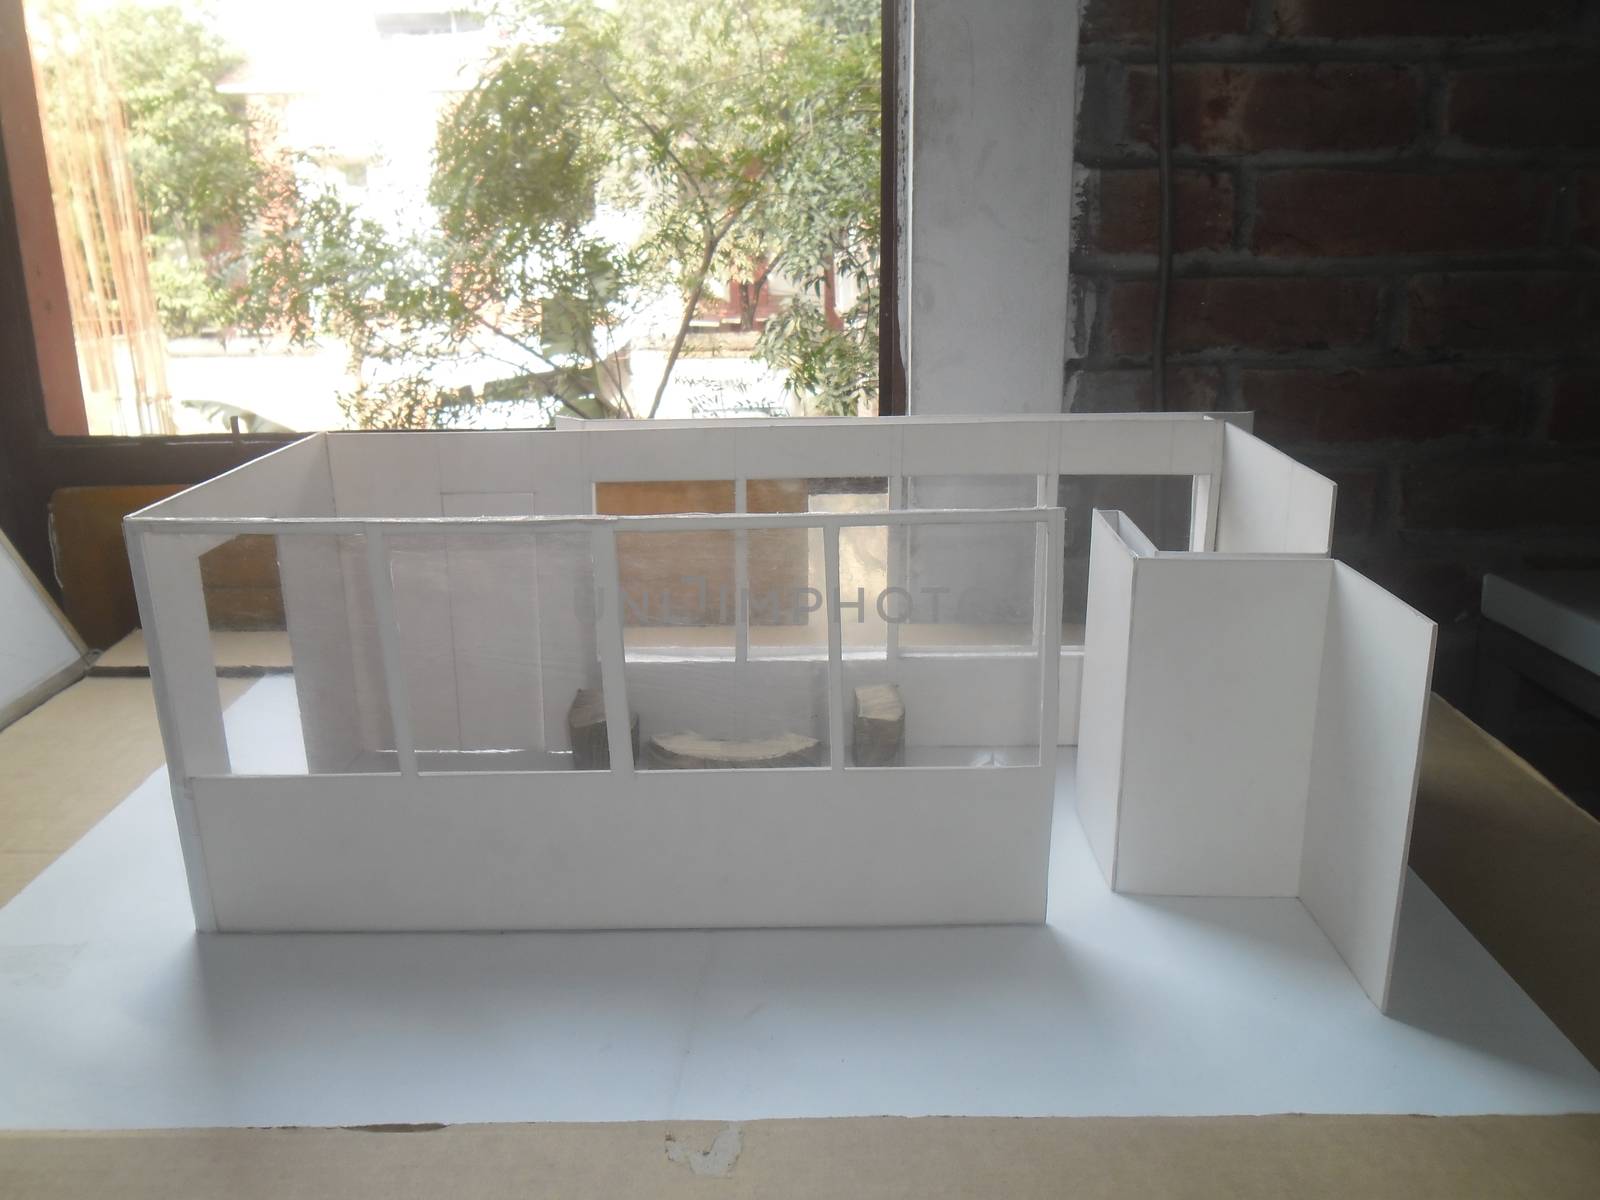 Architecture model with round seating space and large windows by shawlinmohd